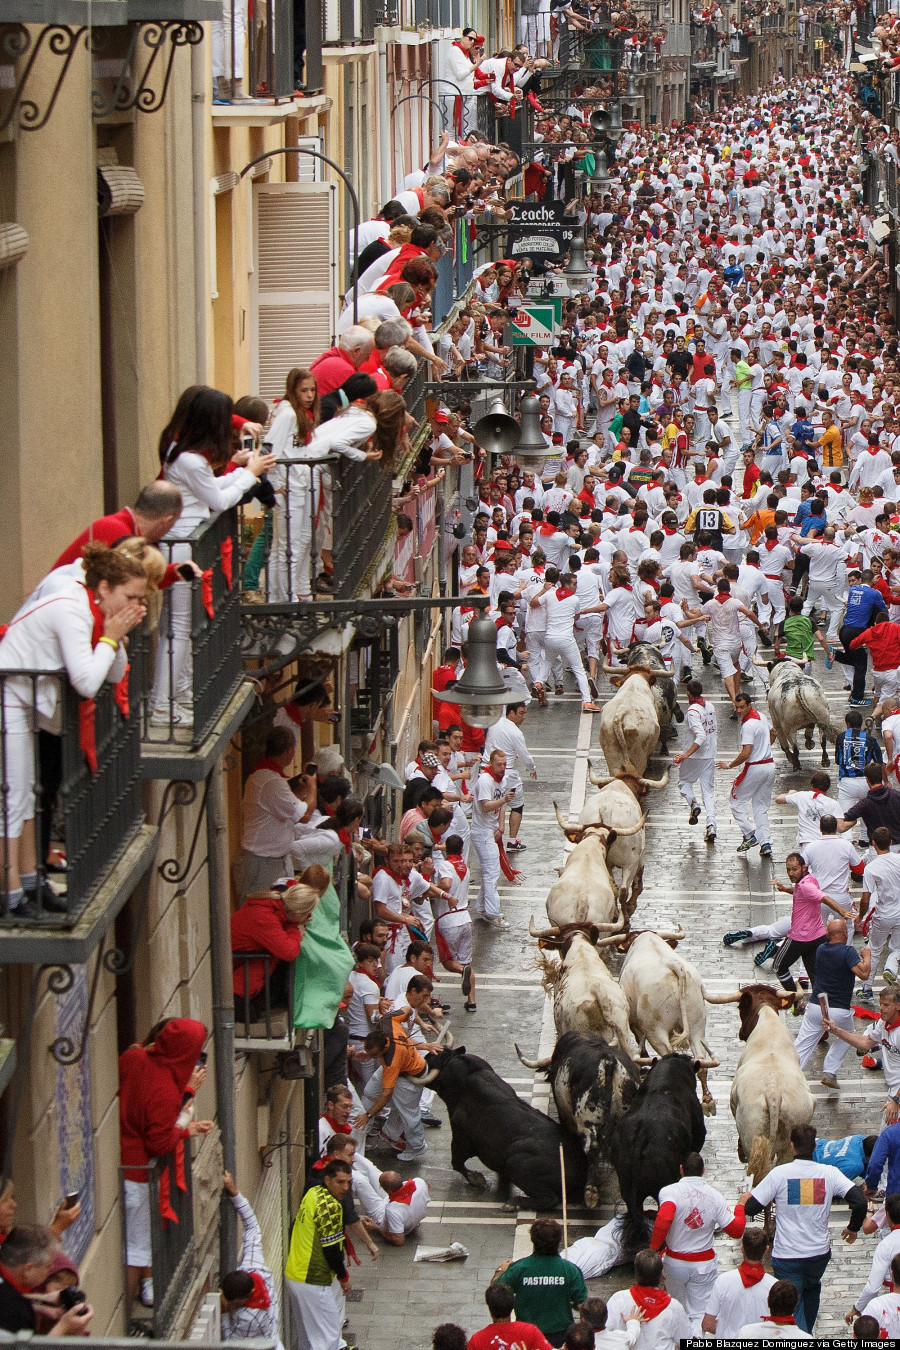 Wild Photos From The First Day Of Pamplona's Running Of The Bulls